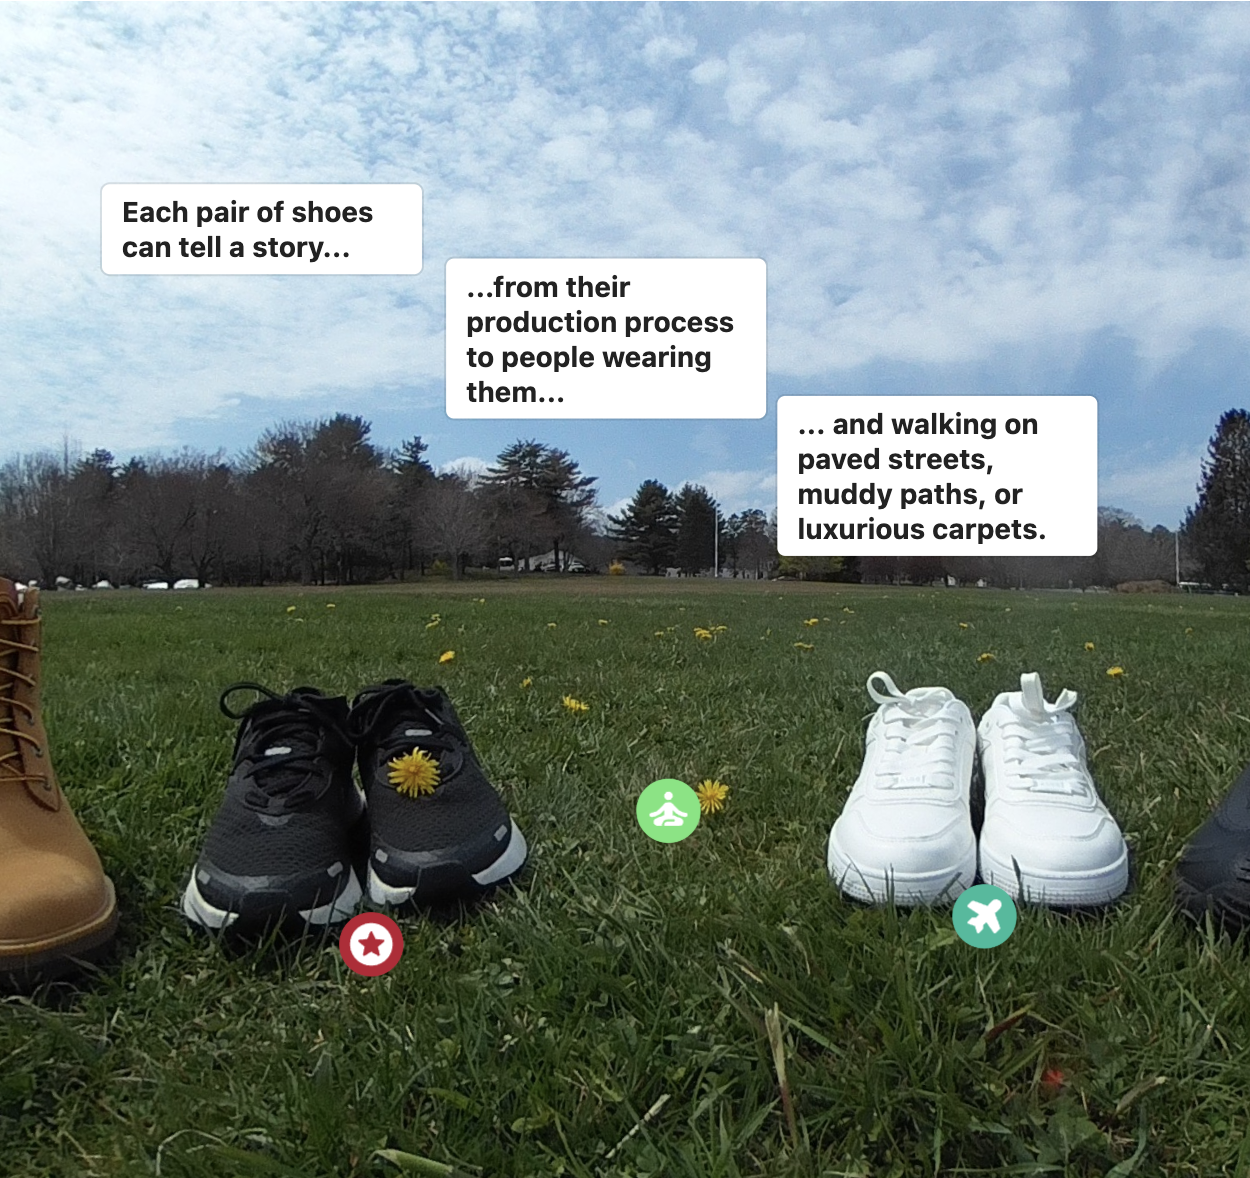 Two sets of shoes rest on the grass and text boxes float above them